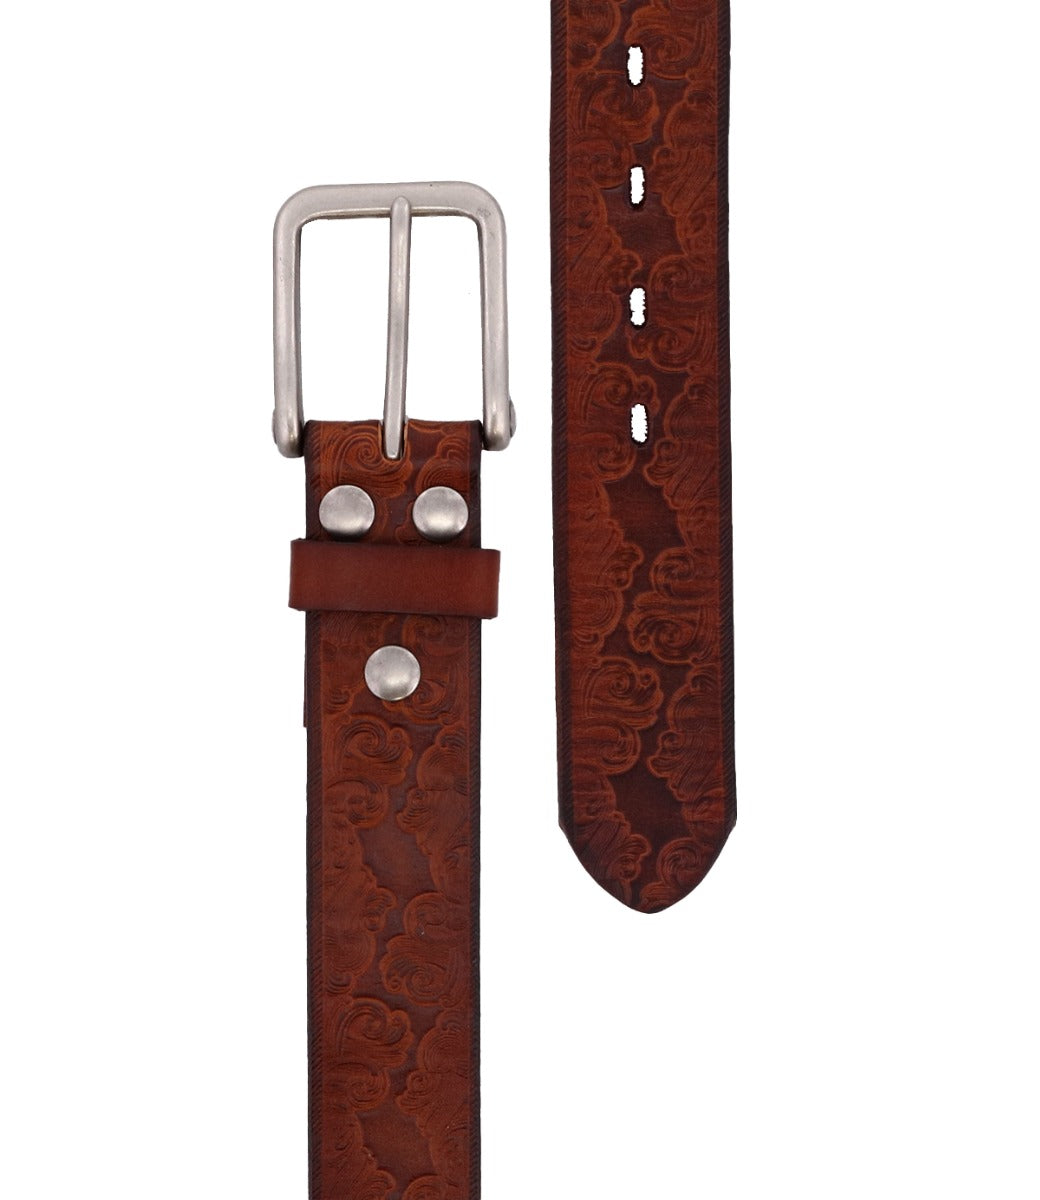 An Everton brown leather belt with a silver buckle by Bed Stu.